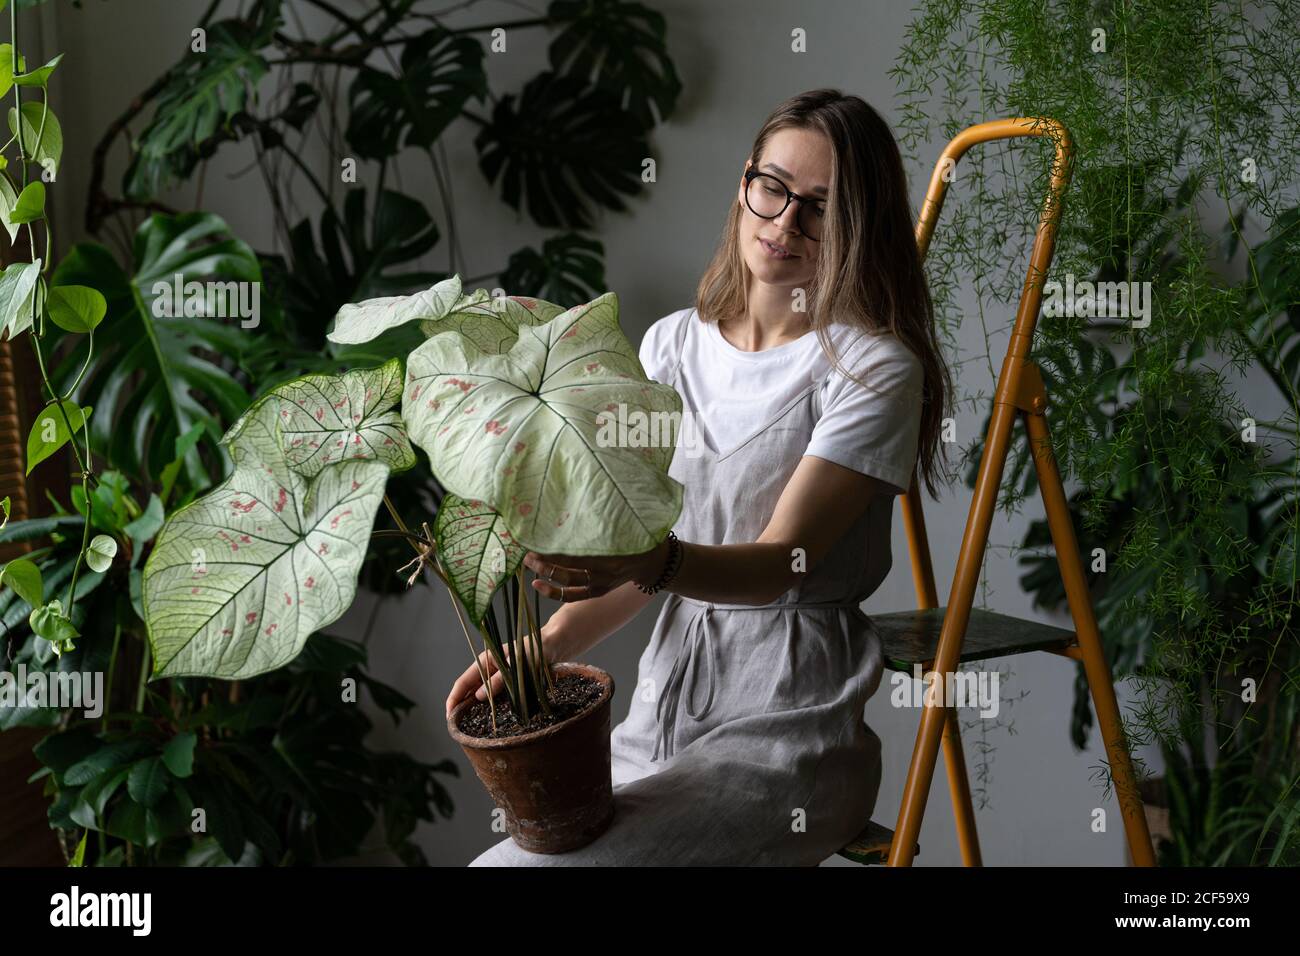 Woman gardener in a grey linen dress, holding caladium houseplant with large white leaves and green veins in clay pot, sitting on stepladder Stock Photo